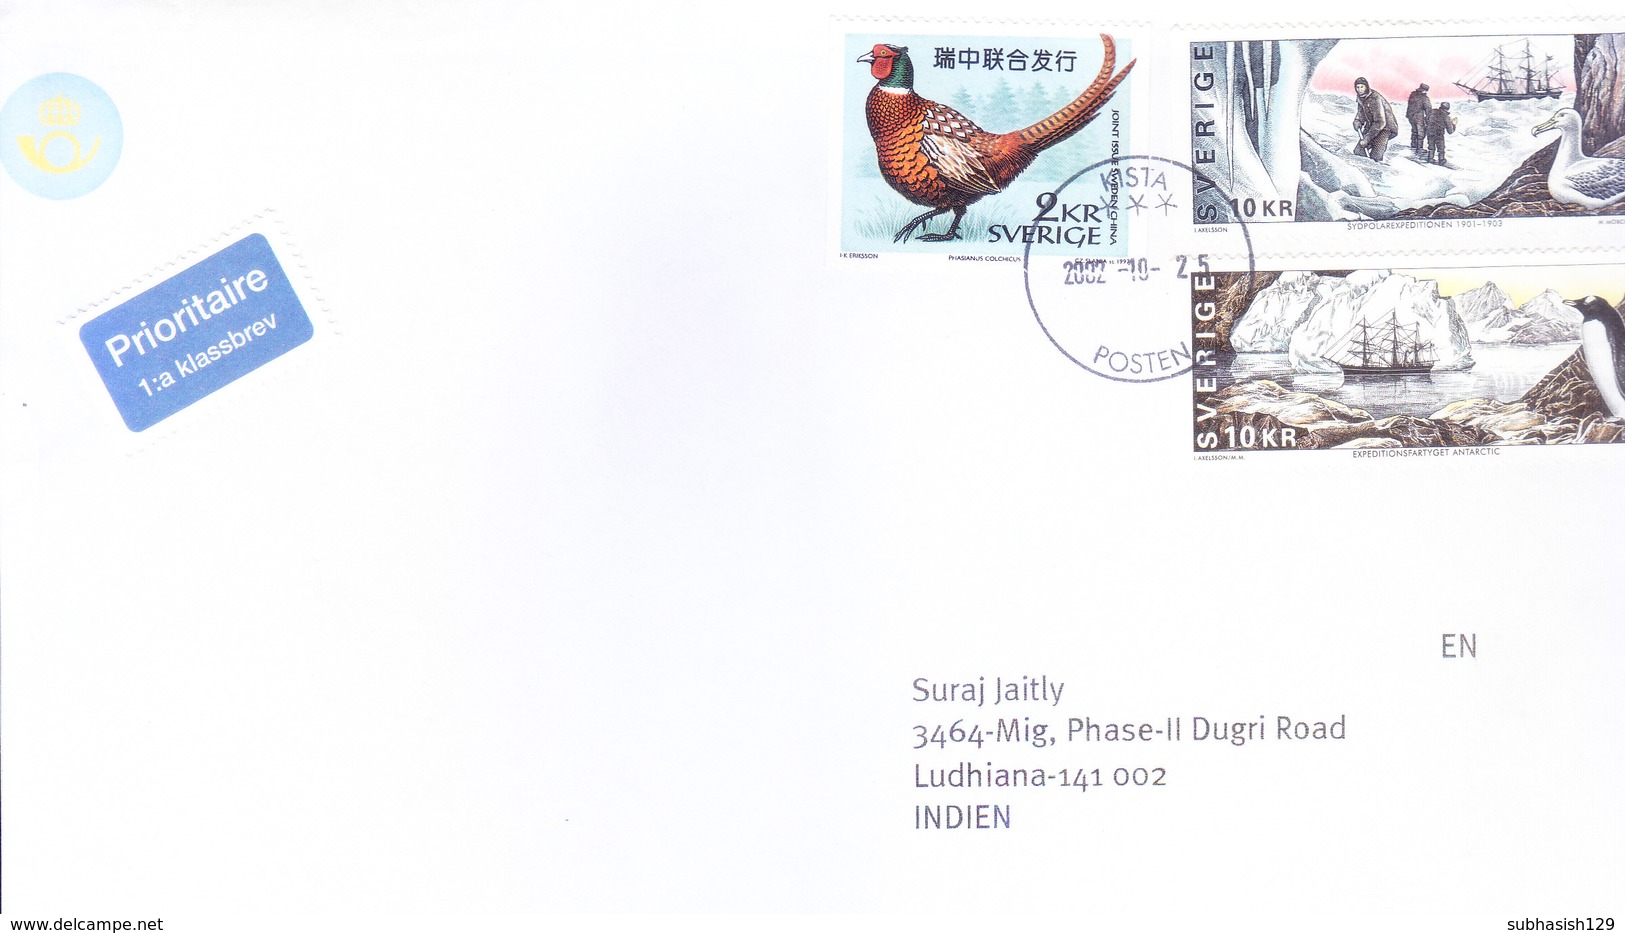 SWEDEN 2002 COMMERCIAL COVER POSTED FROM KISTA FOR INDIA - ANTARCTIC EXPEDITION STAMP, SWEDEN CHINA JOINT ISSUE STAMP - Lettres & Documents